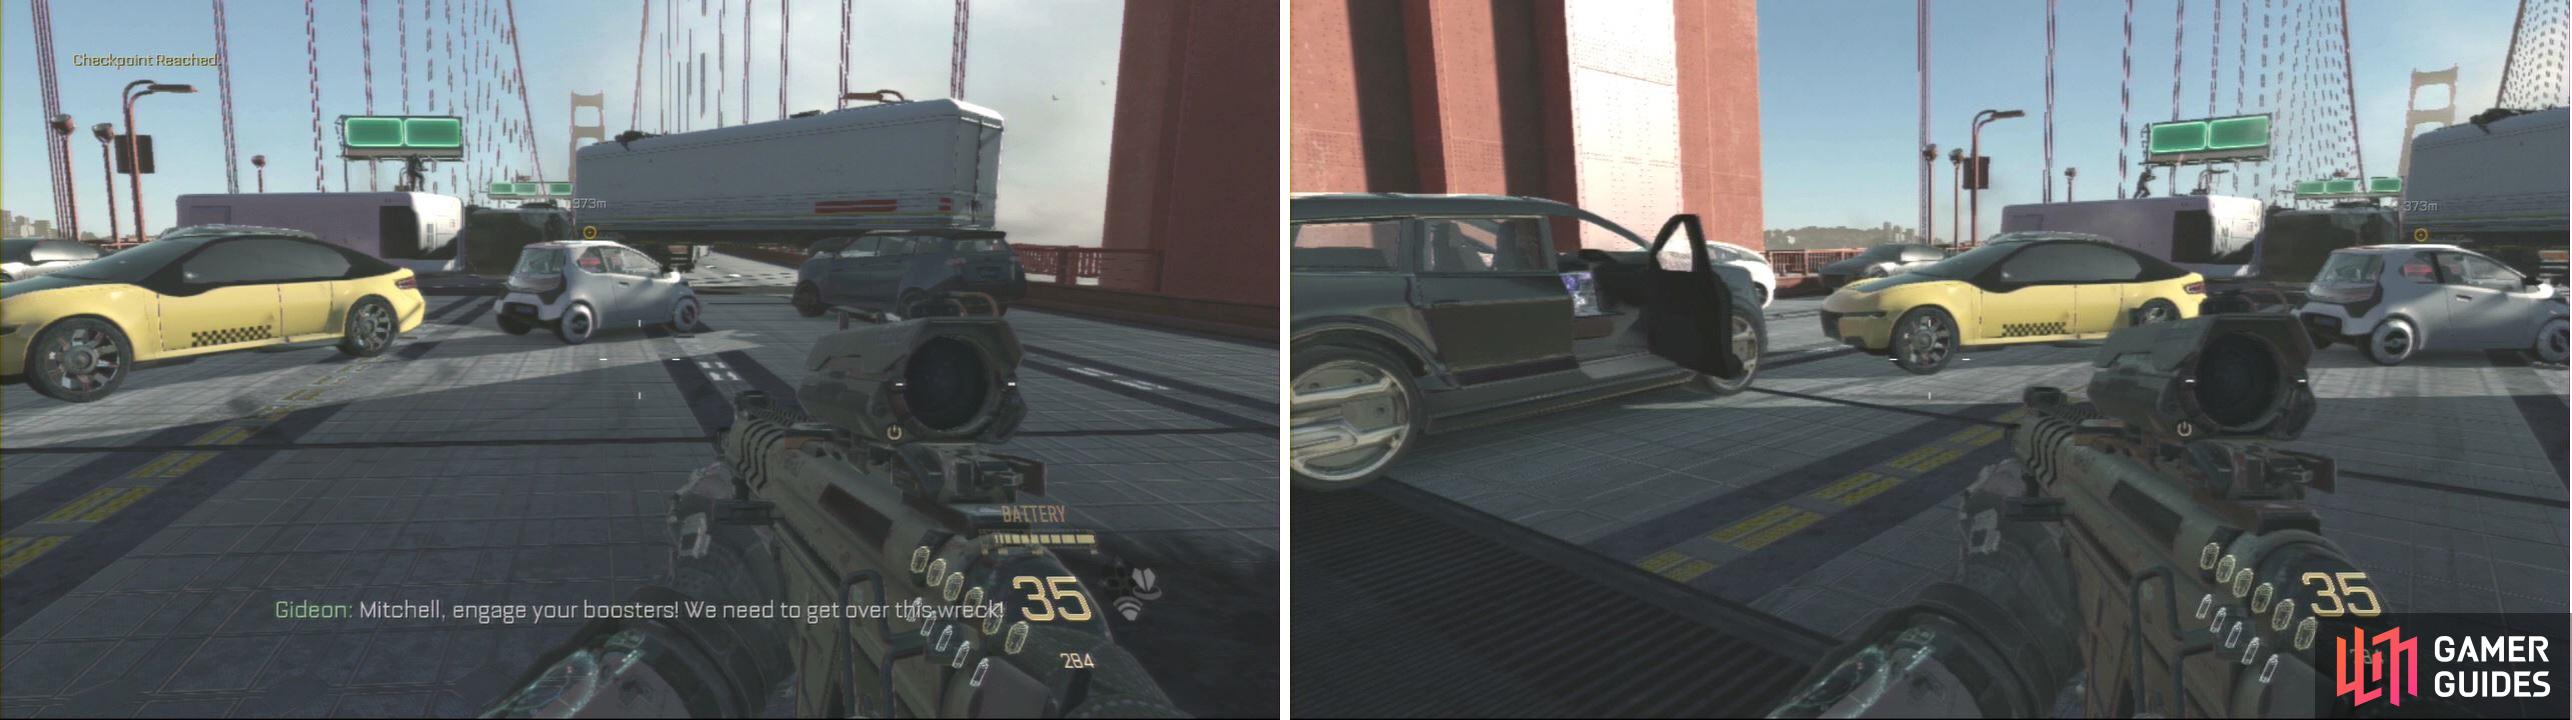 Around 380m from the objective marker, check the left side of the yellow car to find it inside another car.